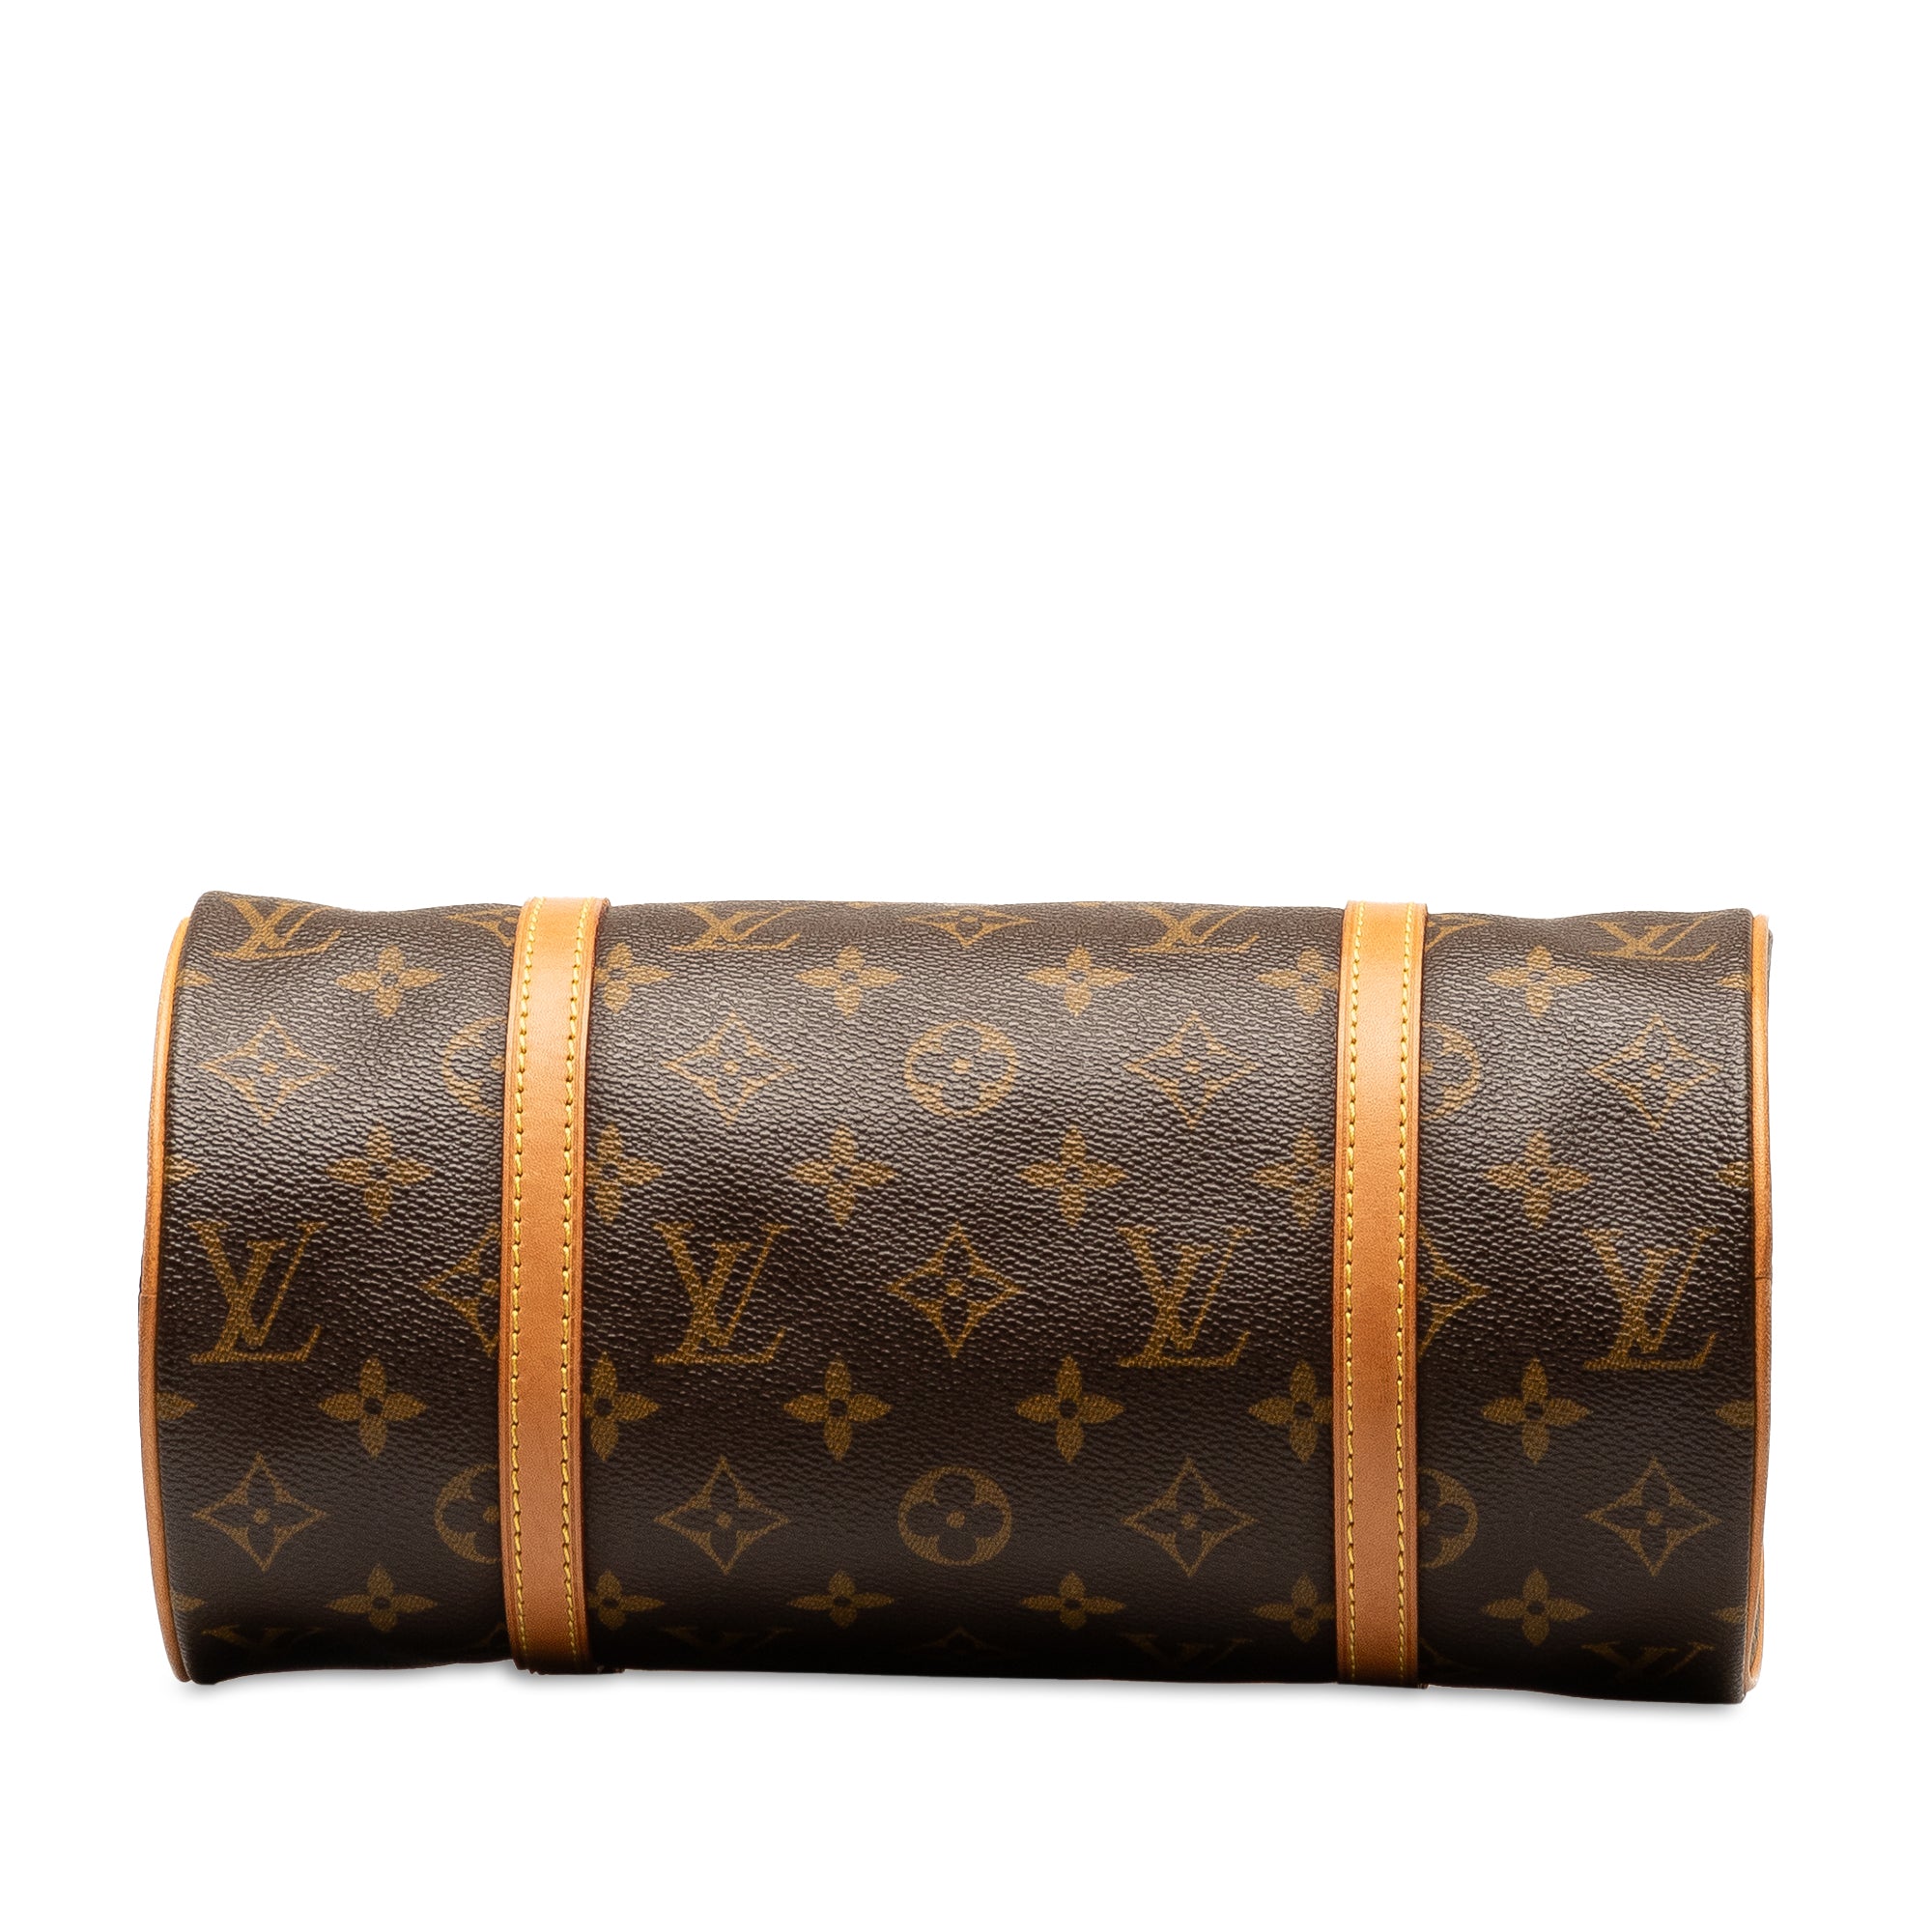 Louis Vuitton XS shoulder bag in brown mahina leather